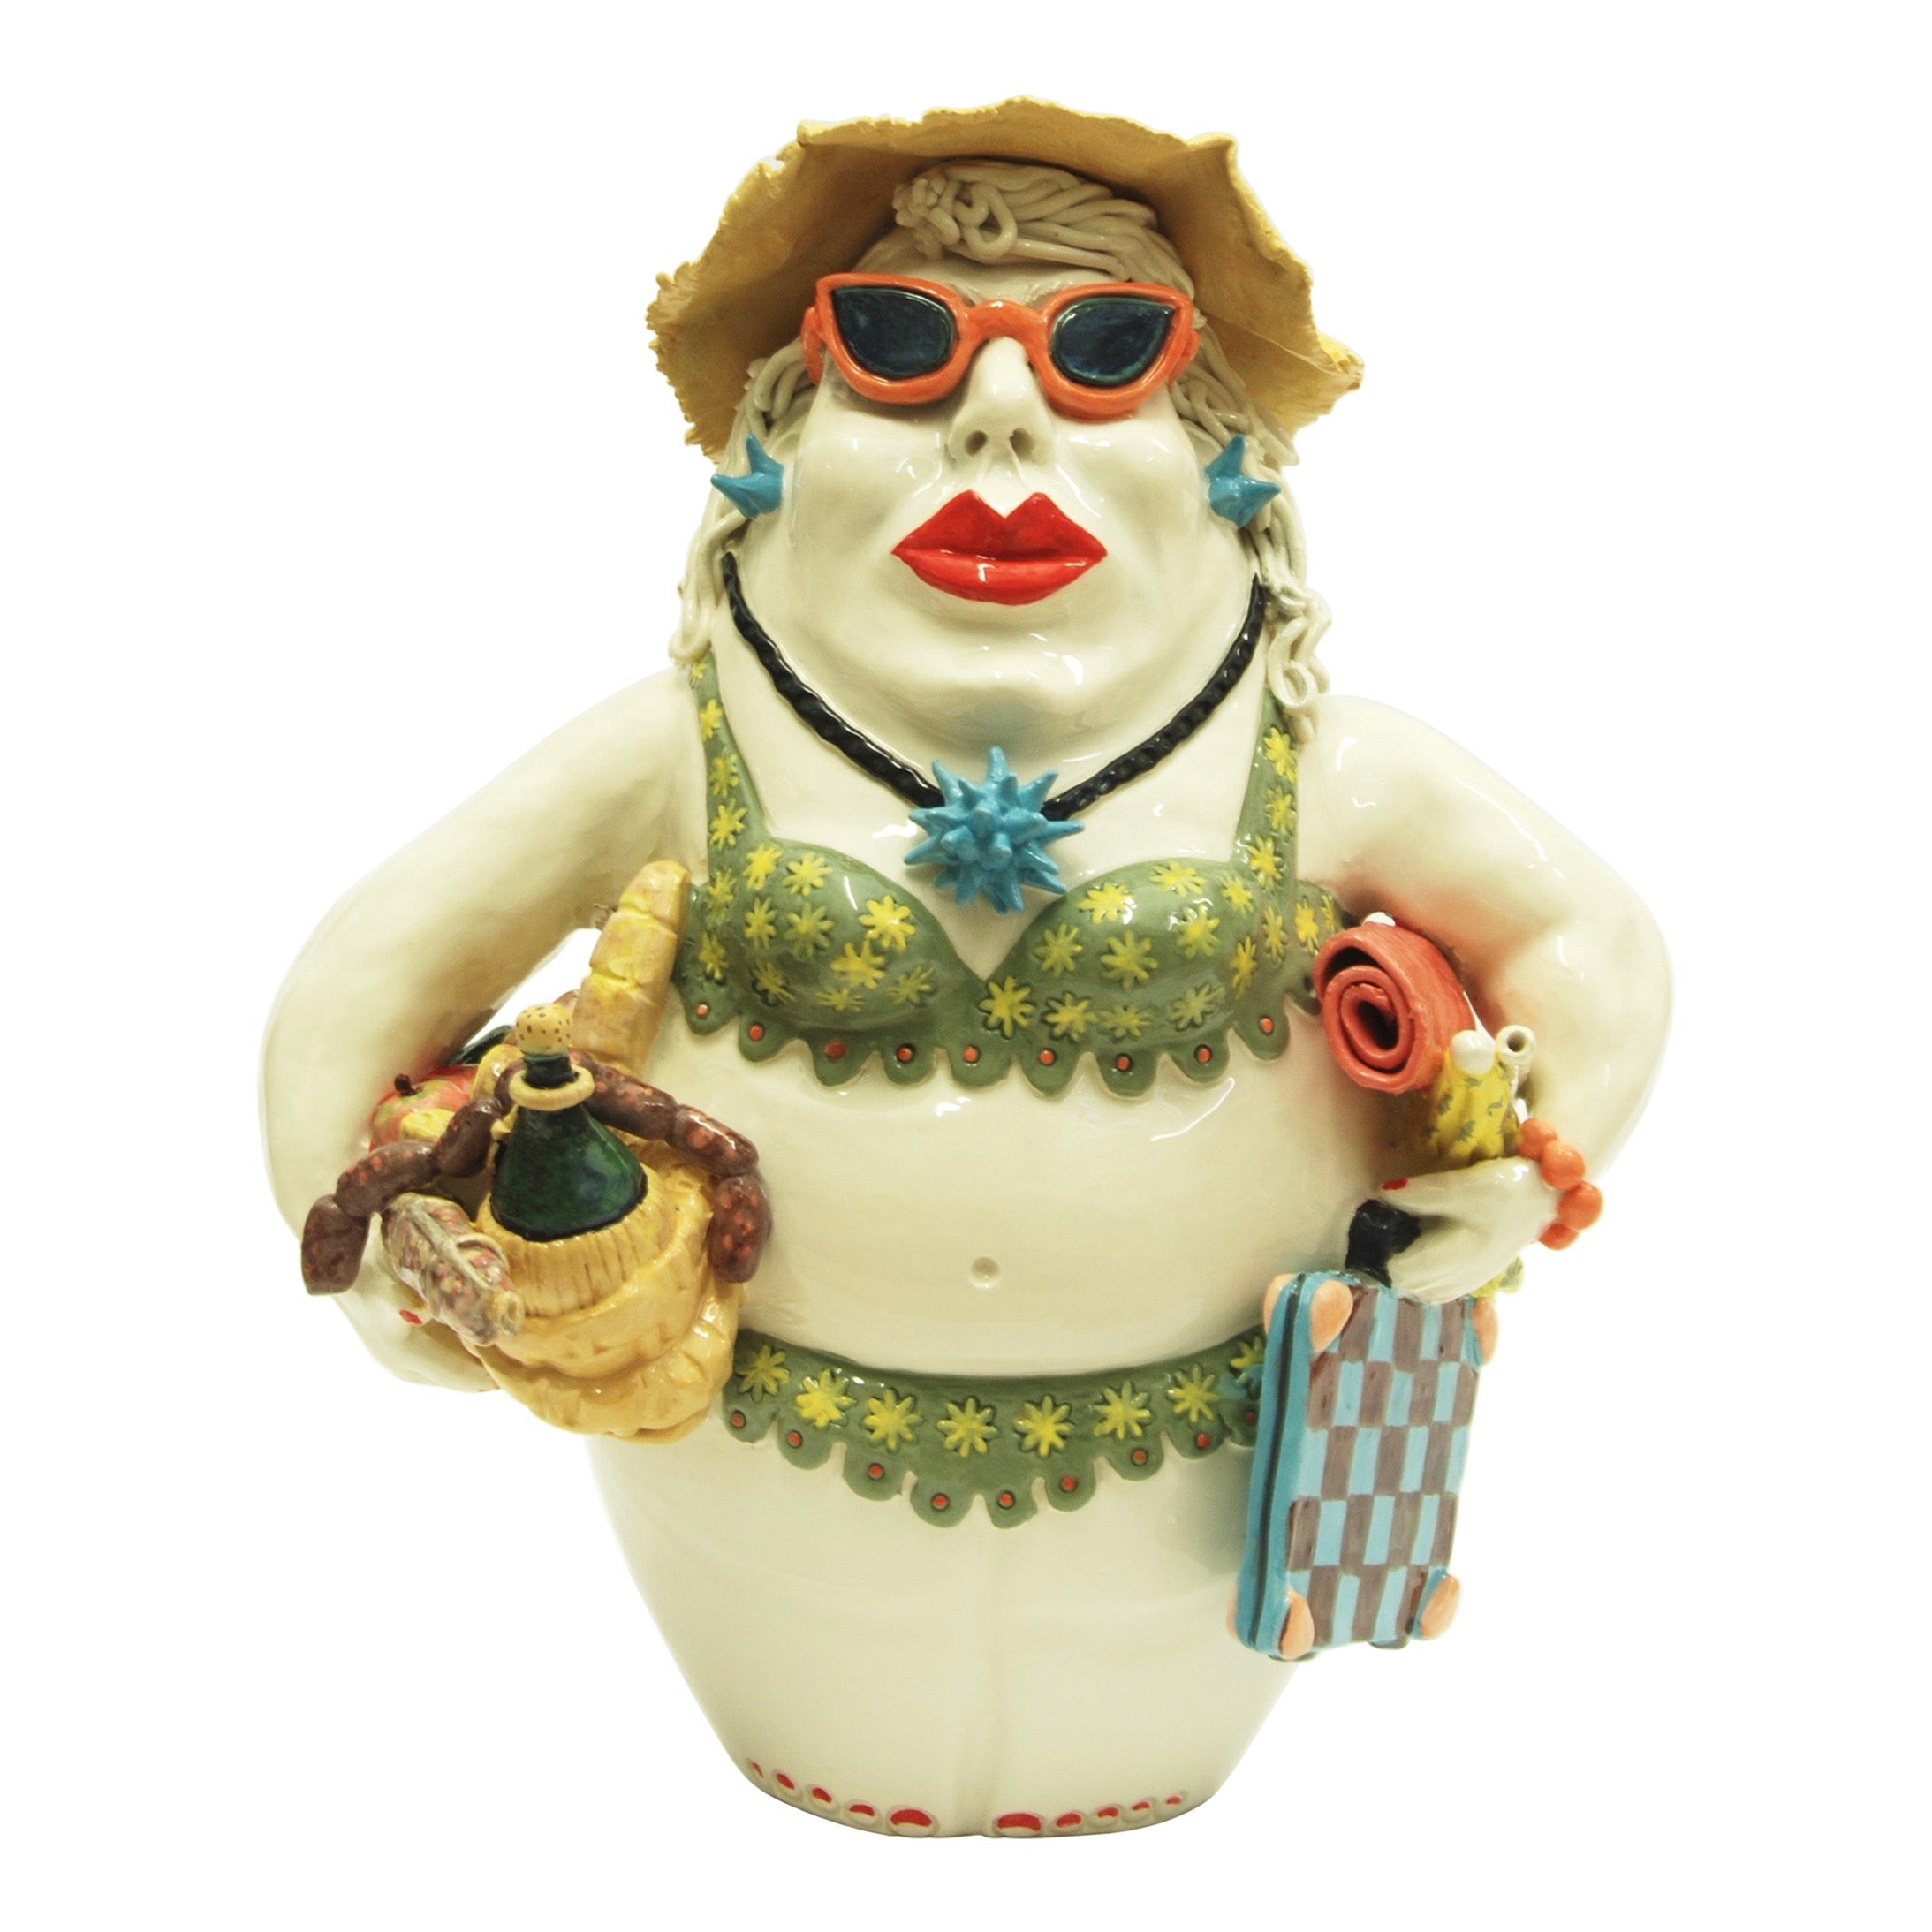 Picnic Fashion Lady, Decorative Centerpiece Handmade Italy 2020, Hand-Crafted